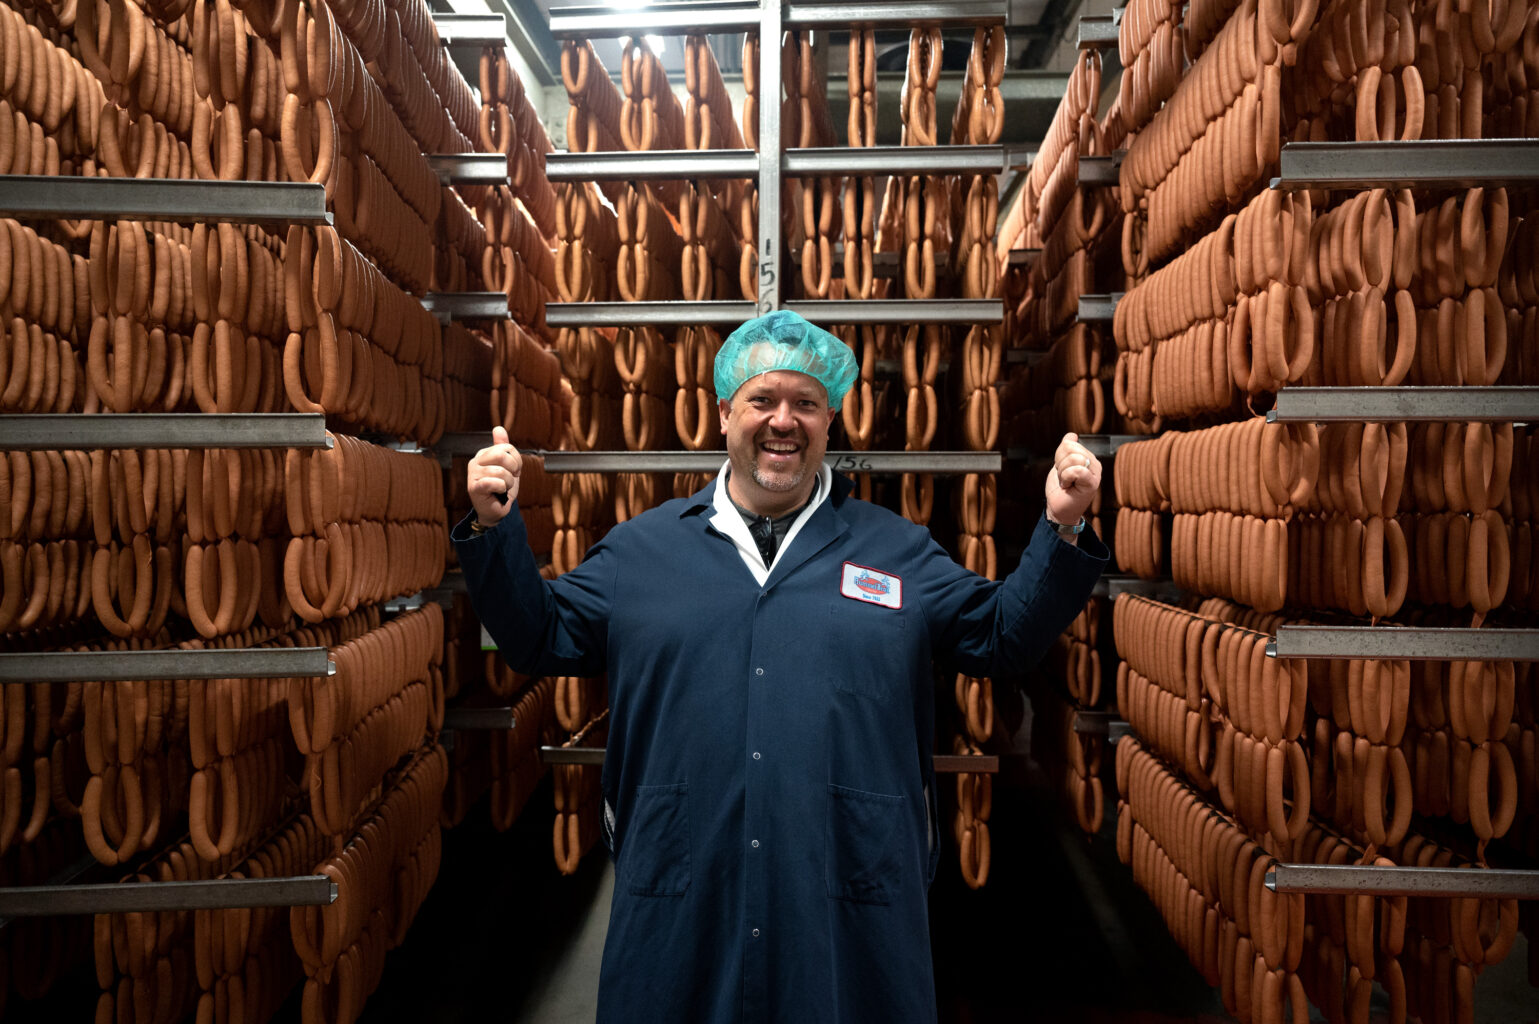 NEW HAVEN, CT -  June 22, 2021: “Seasoned” host Chef Plum stands for a portrait in front of racks of cooling hot dogs at the Hummel Bros. factory in New Haven, Conn. 
(Ryan Caron King / Connecticut Public)